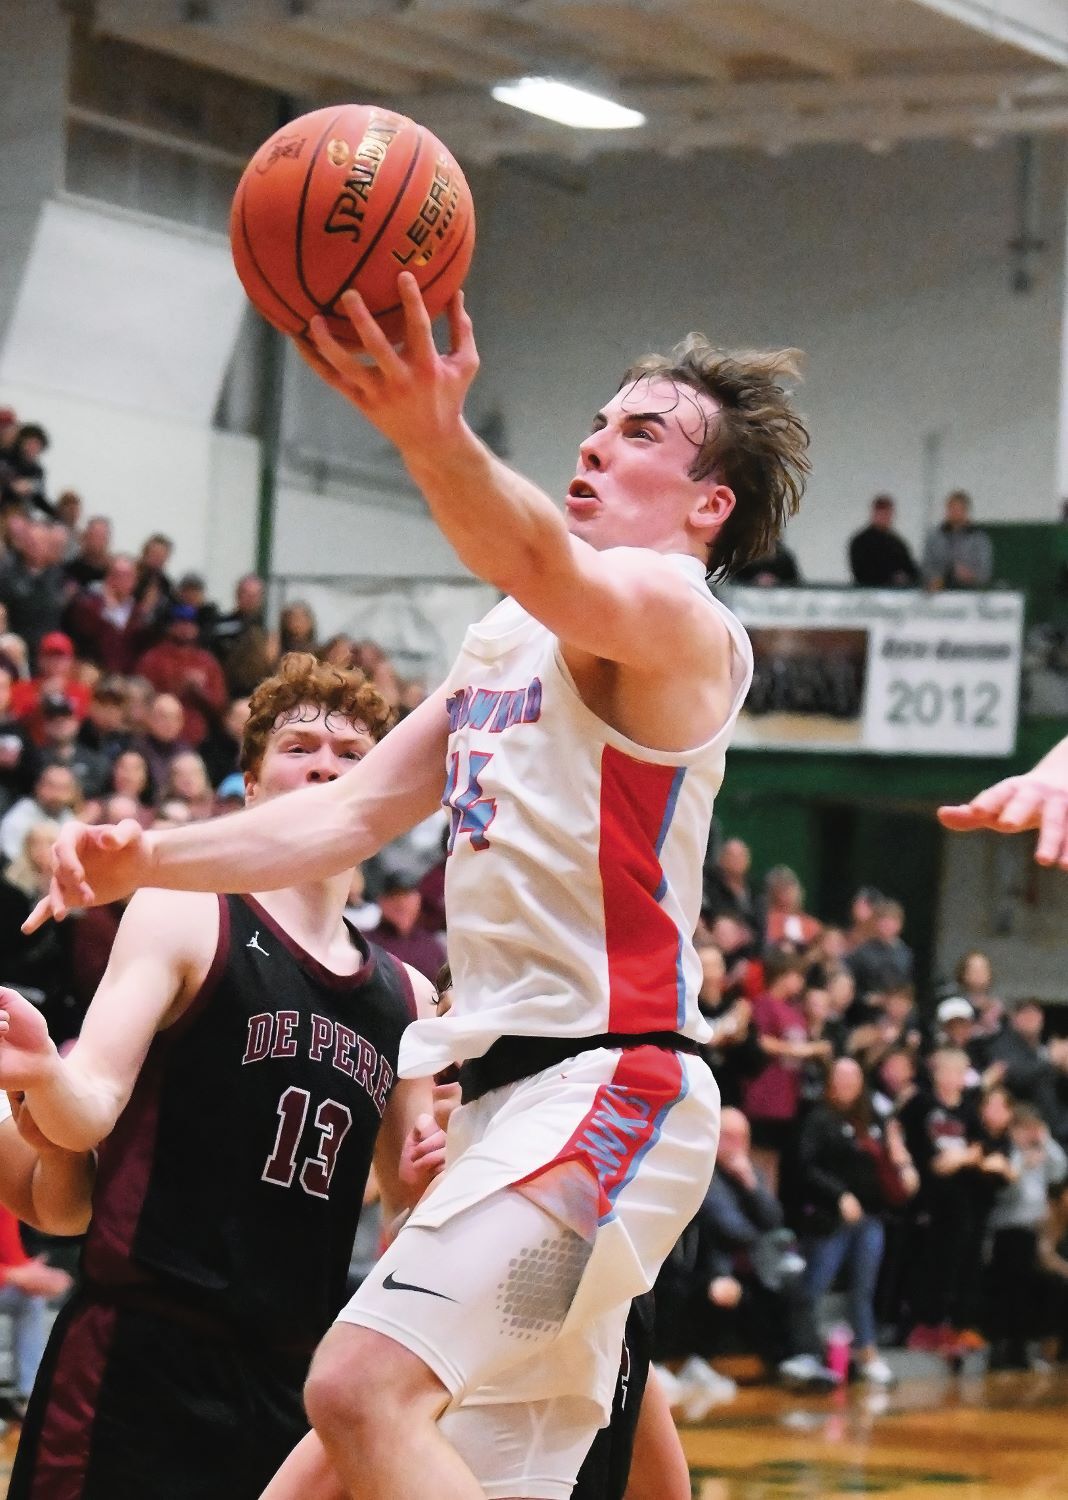 Classic 8 Teams Arrowhead and Kettle Moraine Could Clash in WIAA State Basketball Finals